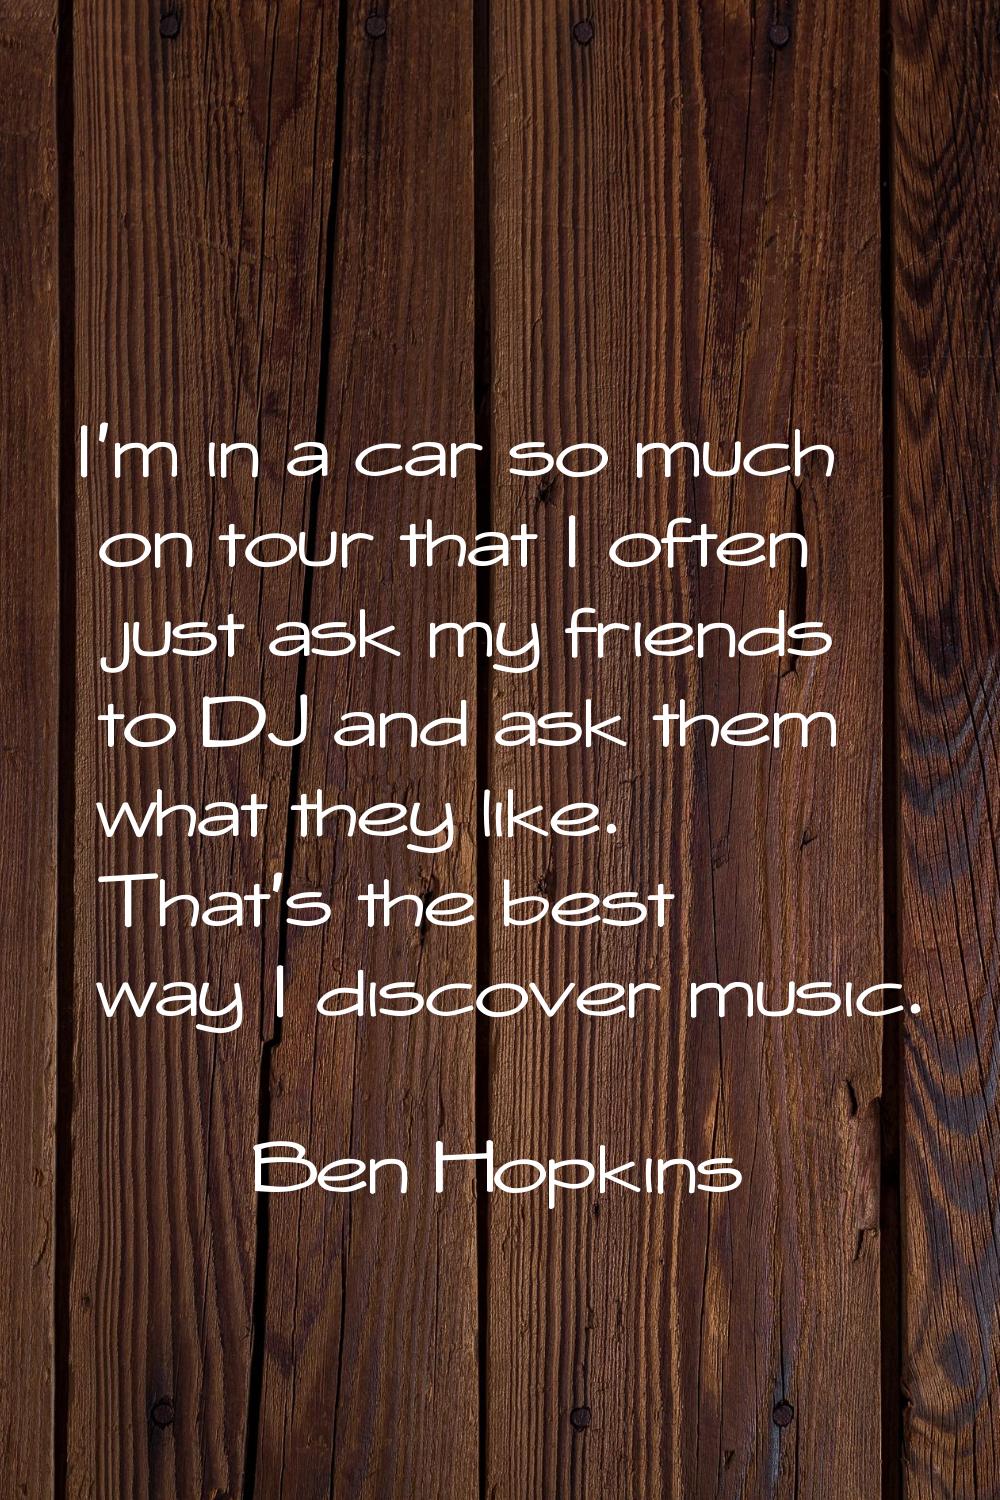 I'm in a car so much on tour that I often just ask my friends to DJ and ask them what they like. Th